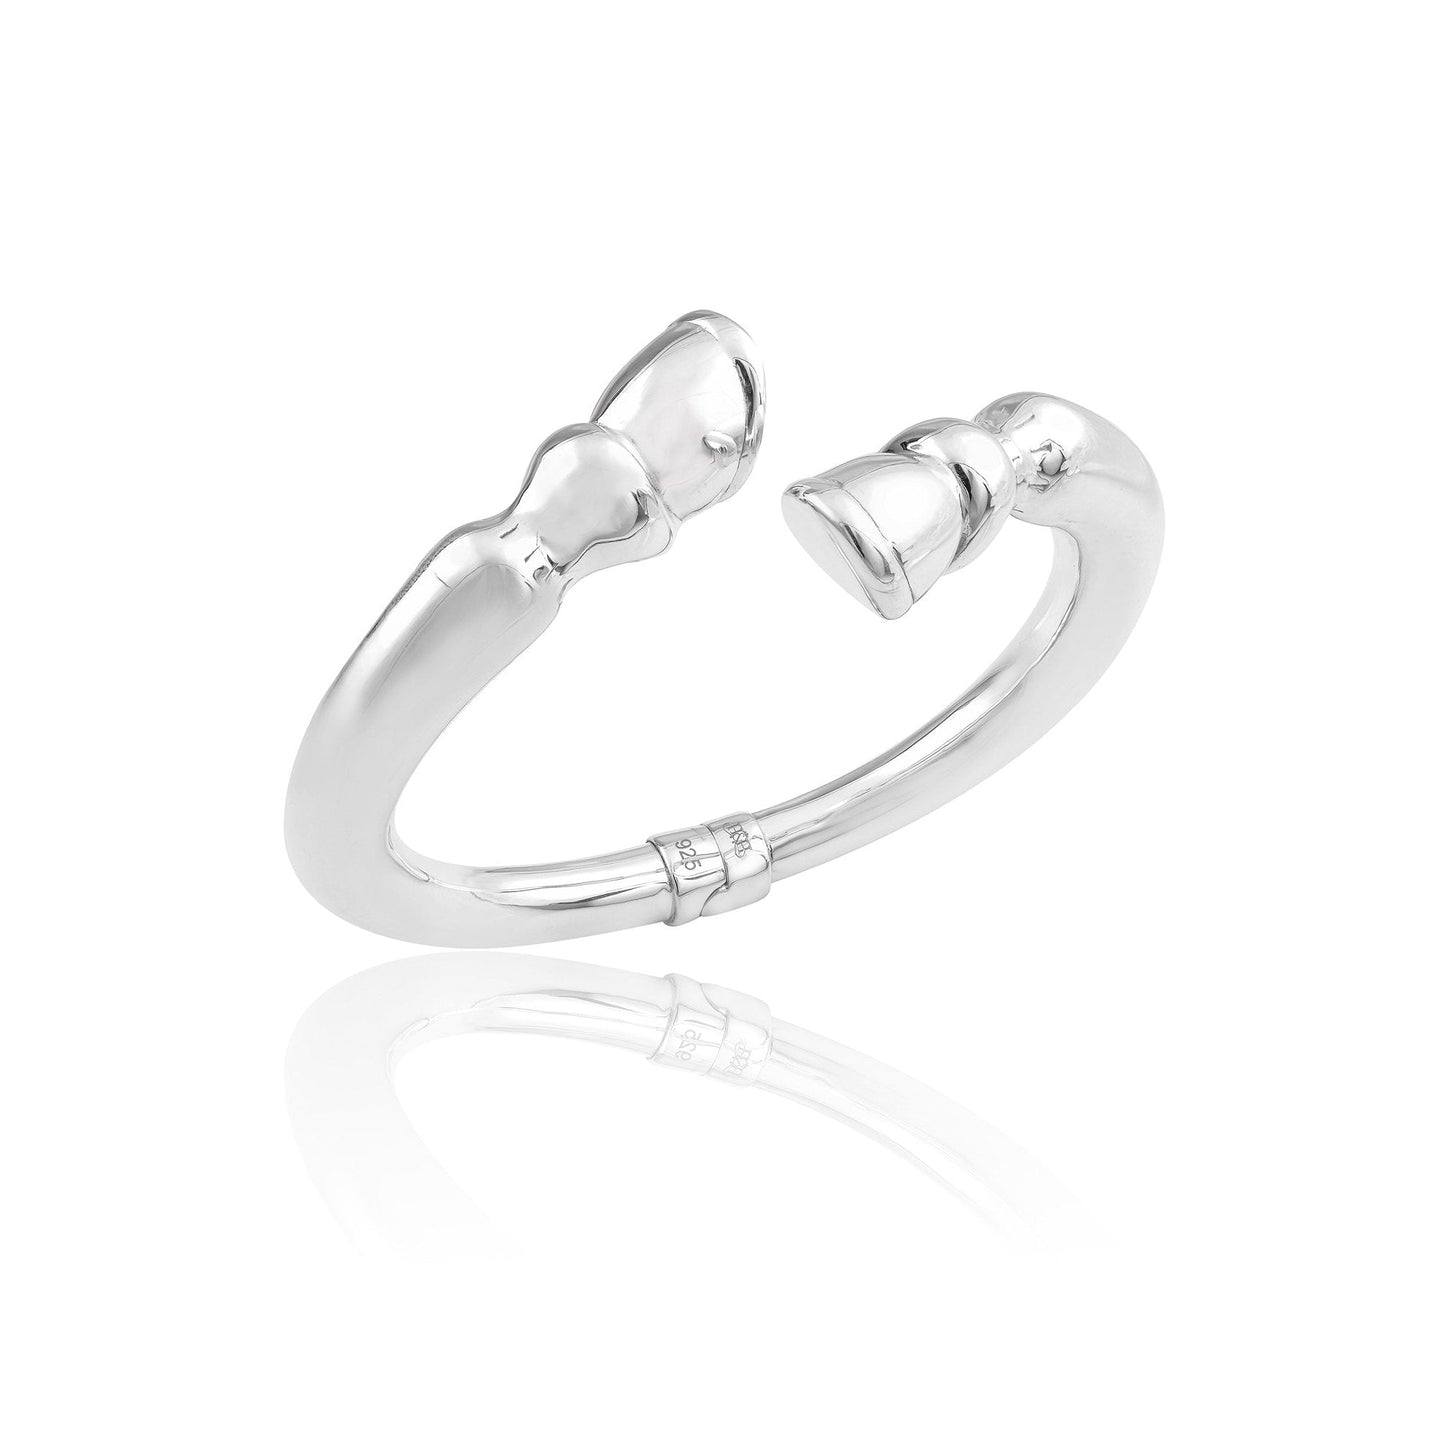 Silver boxing glove ring